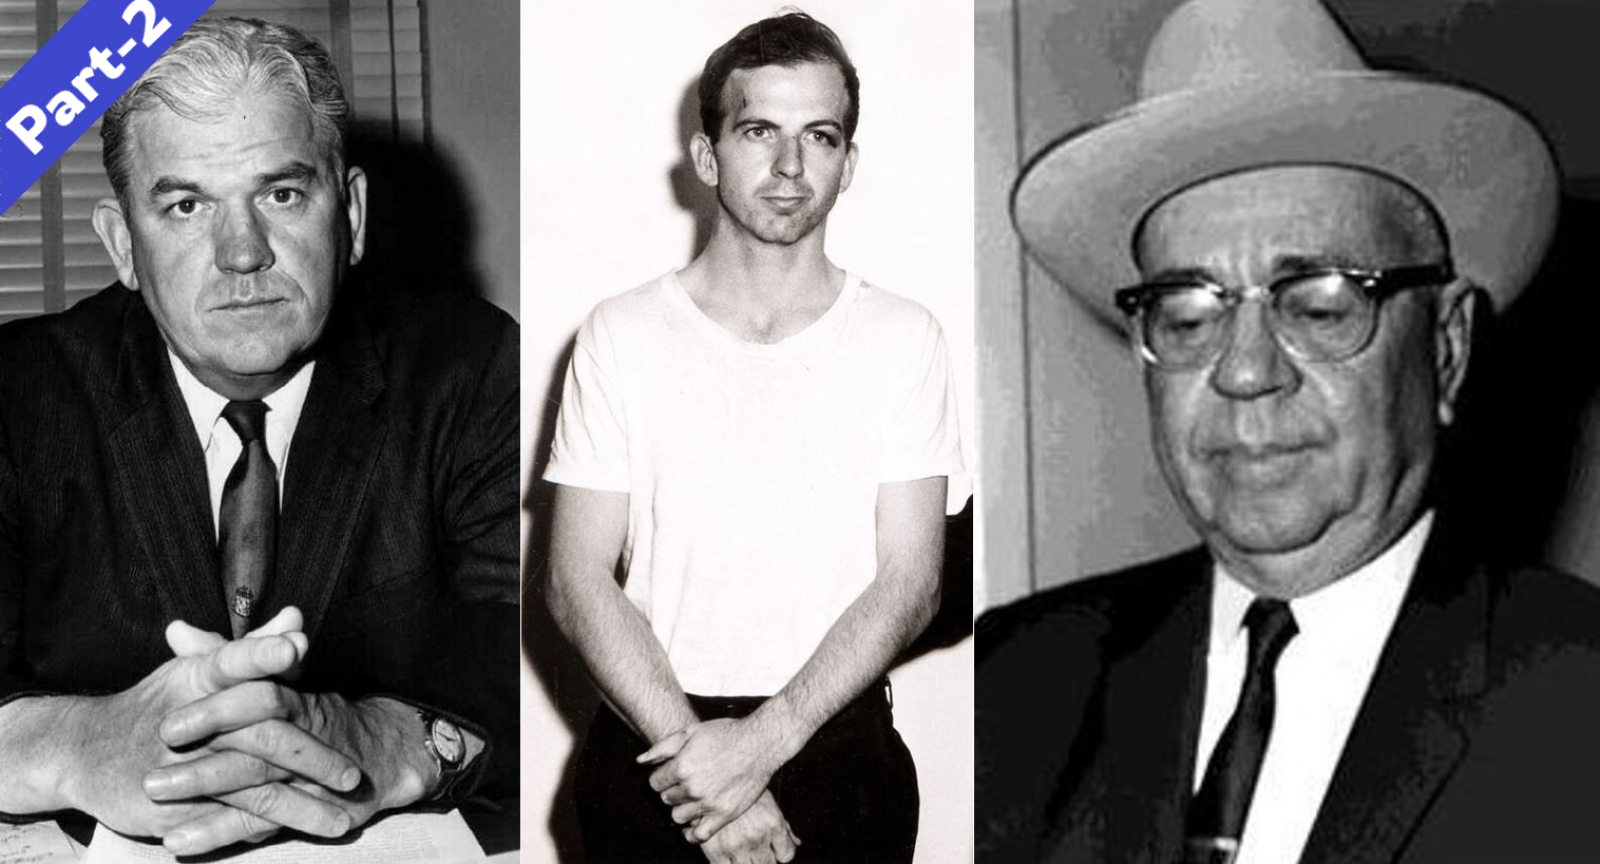 The Dallas Police Convicted Oswald without a Trial - Part 2/2